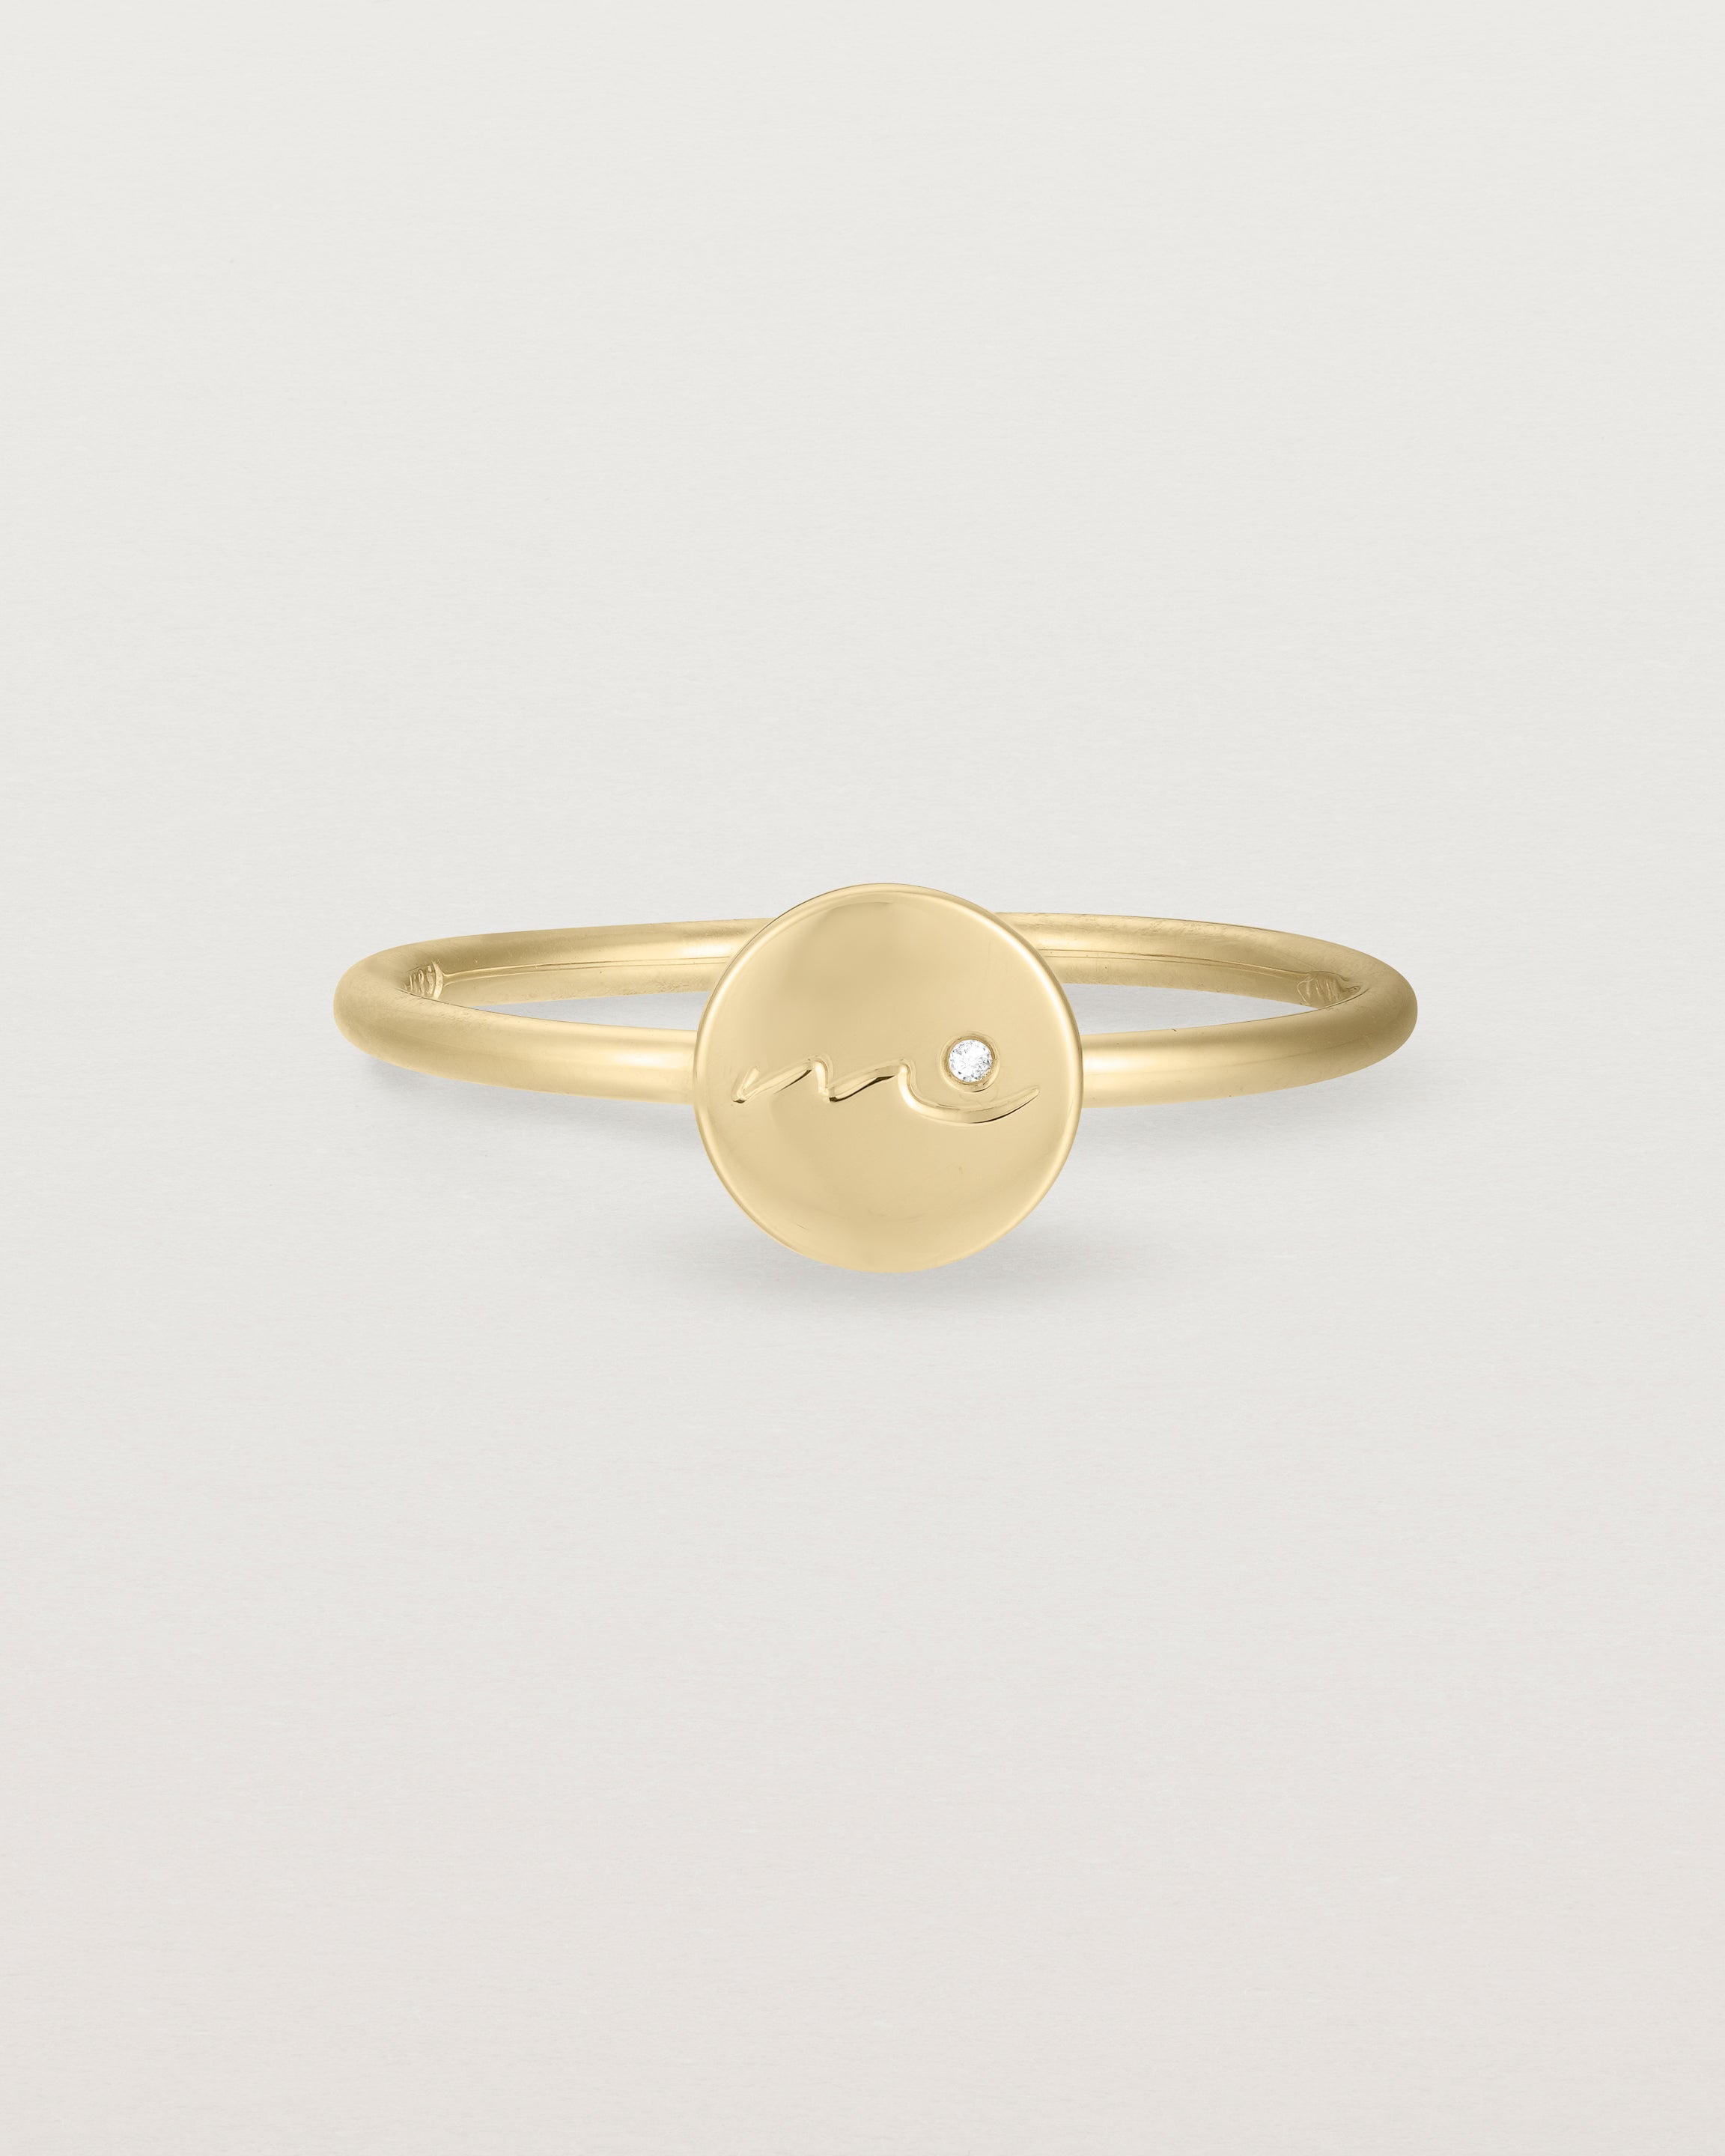 Front view of a yellow gold ring featuring a disc with the letter m engraved and a small diamond set